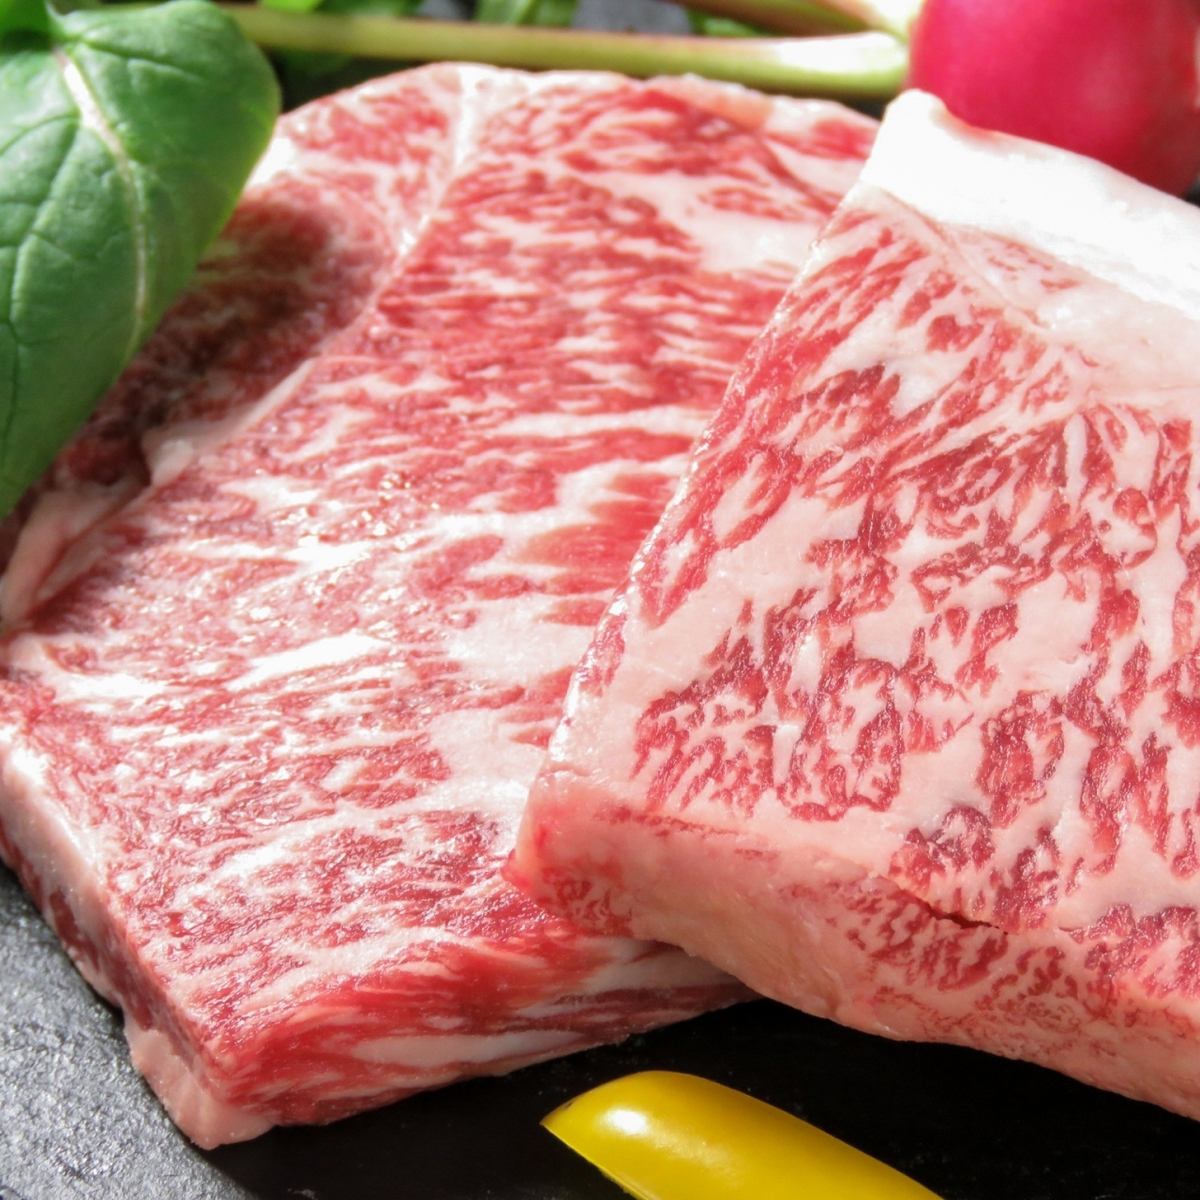 You can enjoy the low prices and high quality that only a yakiniku restaurant with authentic purchasing can offer★